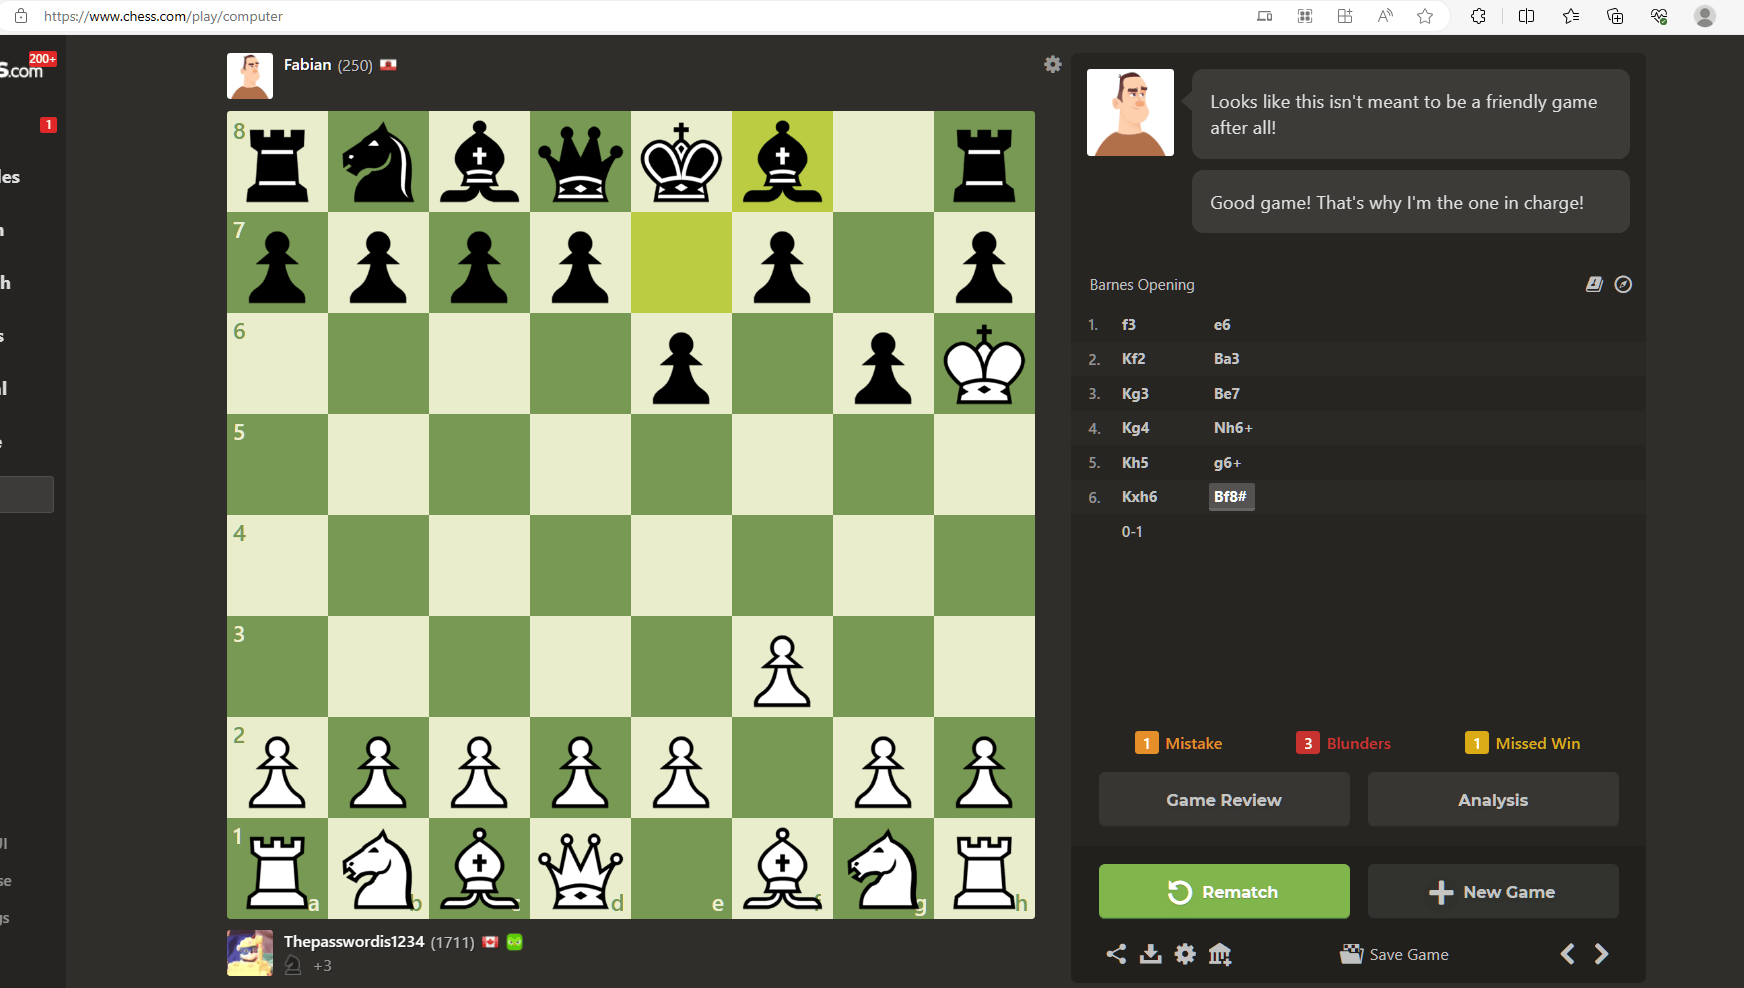 How Fast Can I Lose to the Martin Bot on Chess.com? 